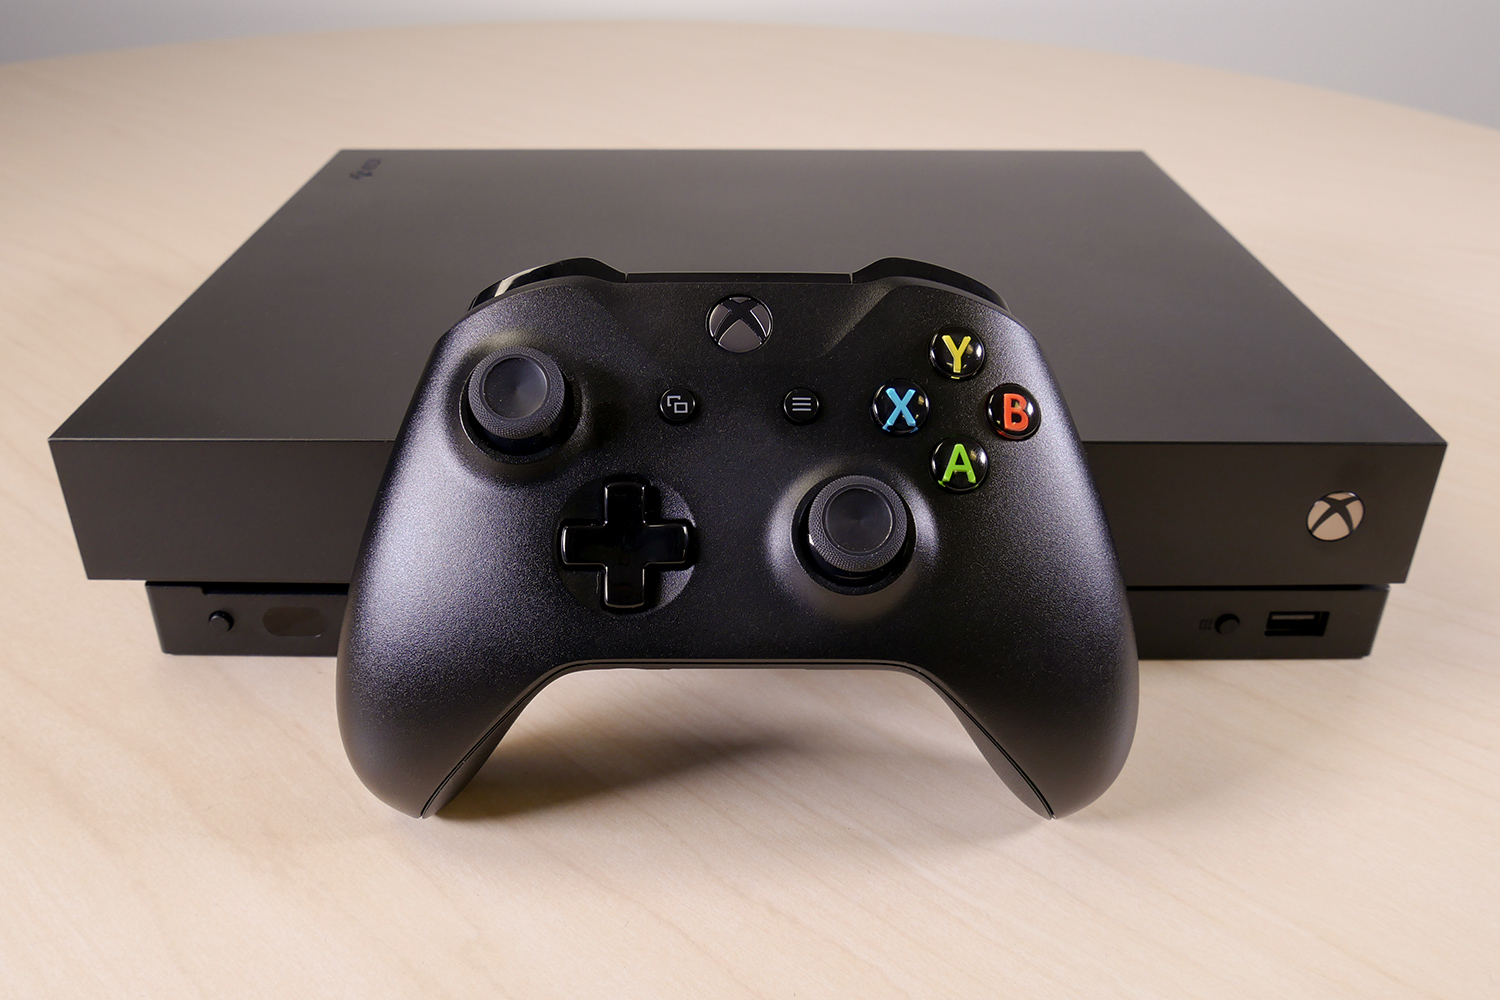 Nuttig Weekendtas Shuraba Xbox One X Review 2020: The Most Powerful Console | Digital Trends